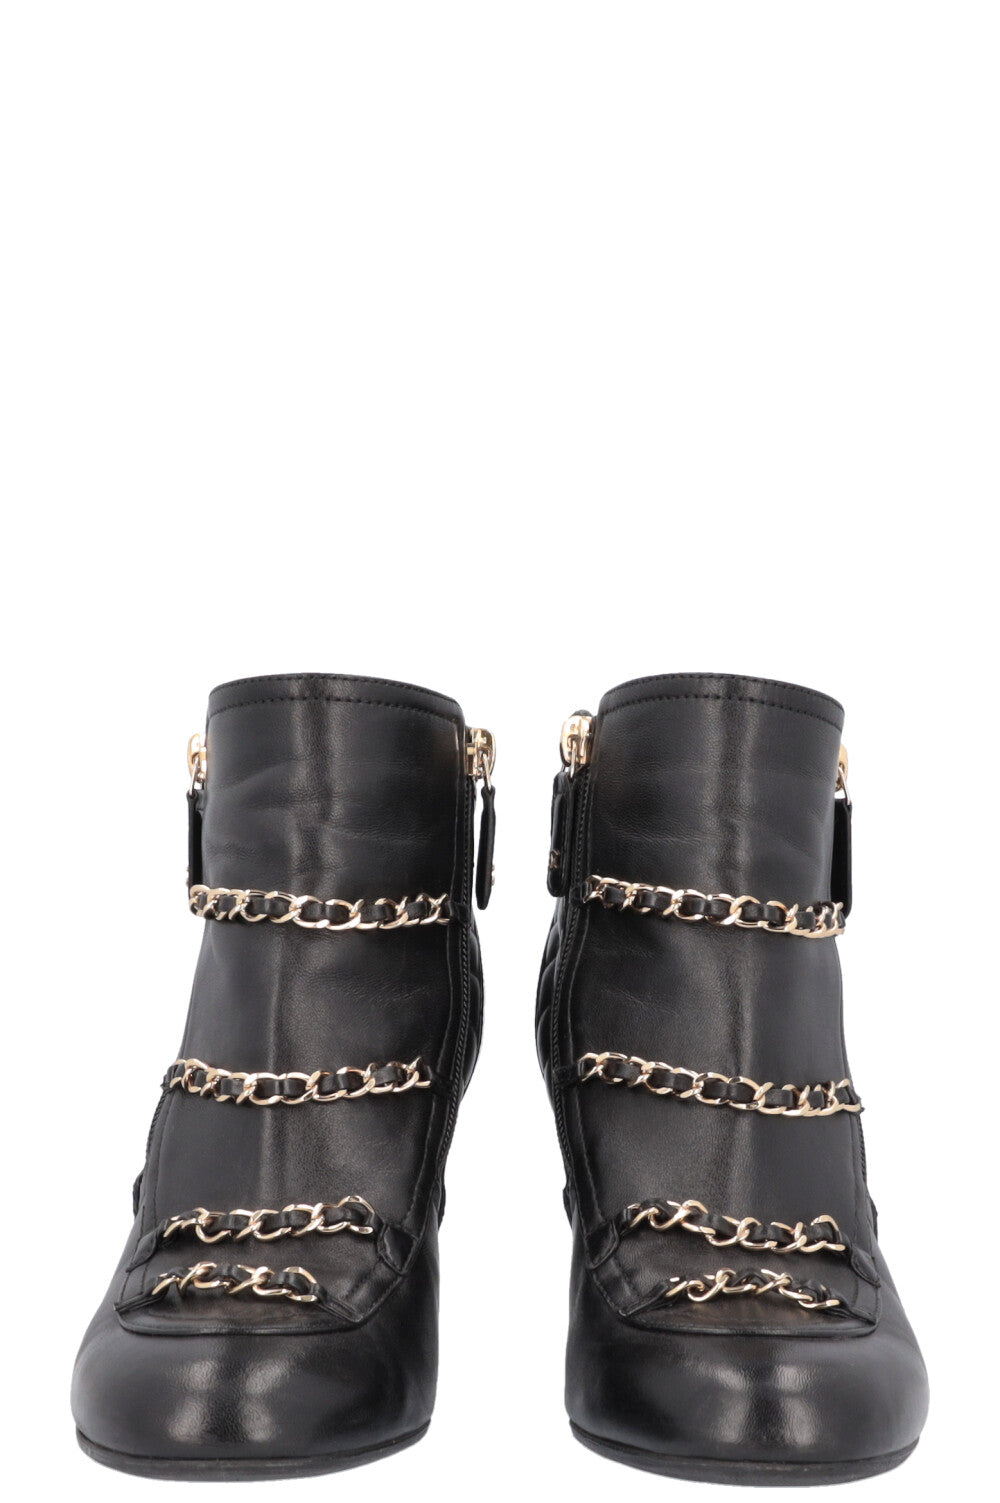 Shop CHANEL ICON 202223FW Ankle Boots G39208 by lufine  BUYMA